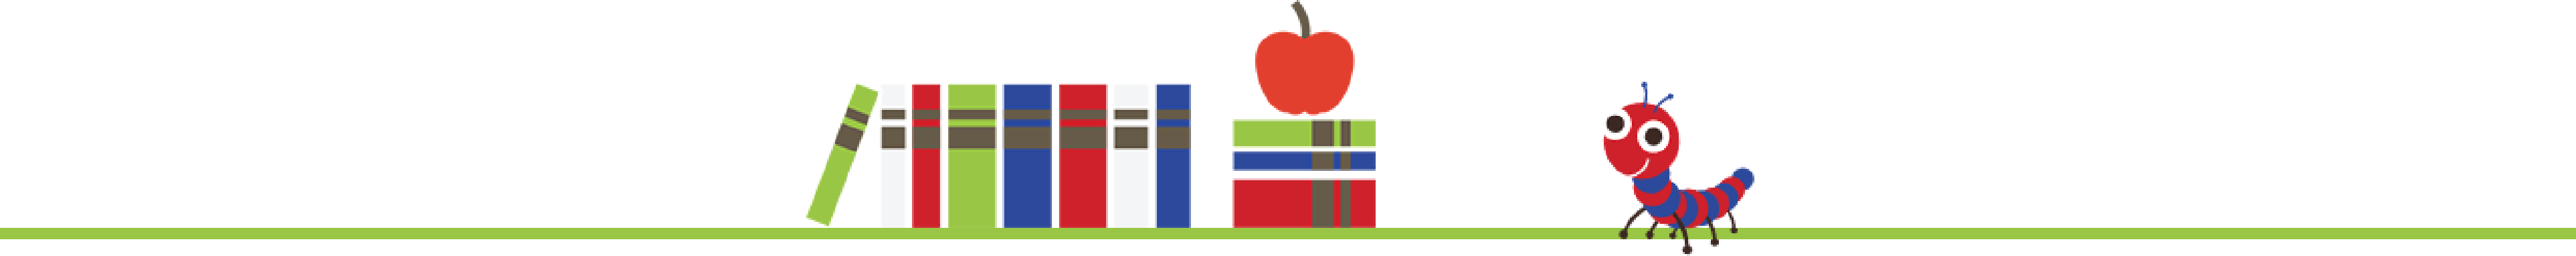 blue and red worm walking on a green line holding a stack of books and an apple